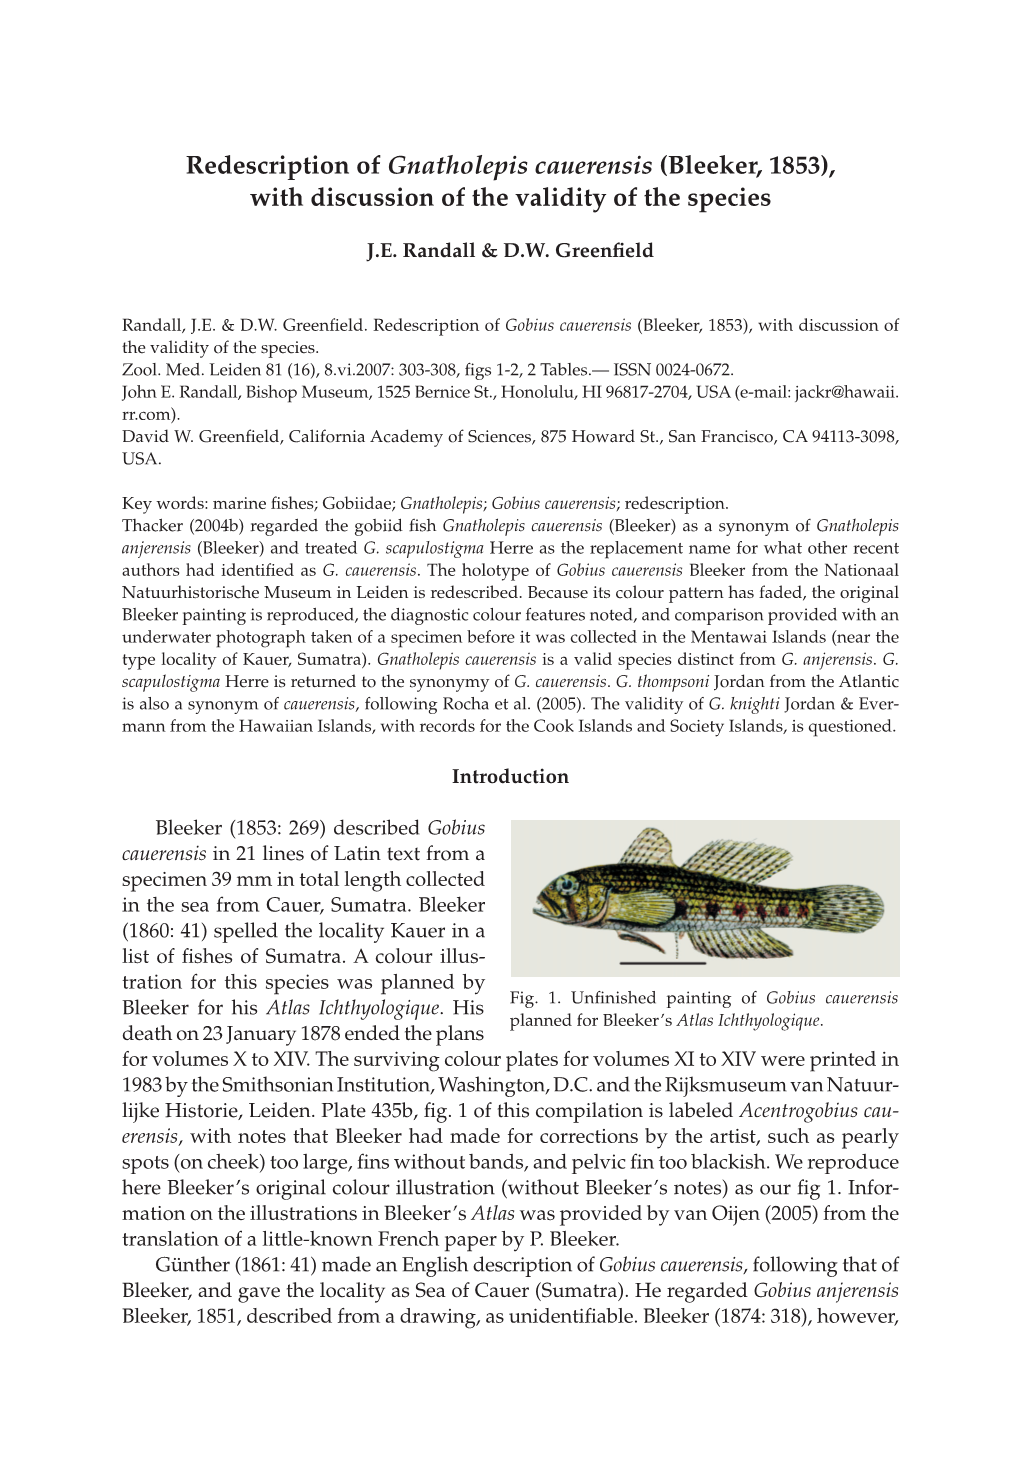 Redescription of Gnatholepis Cauerensis (Bleeker, 1853), with Discussion of the Validity of the Species